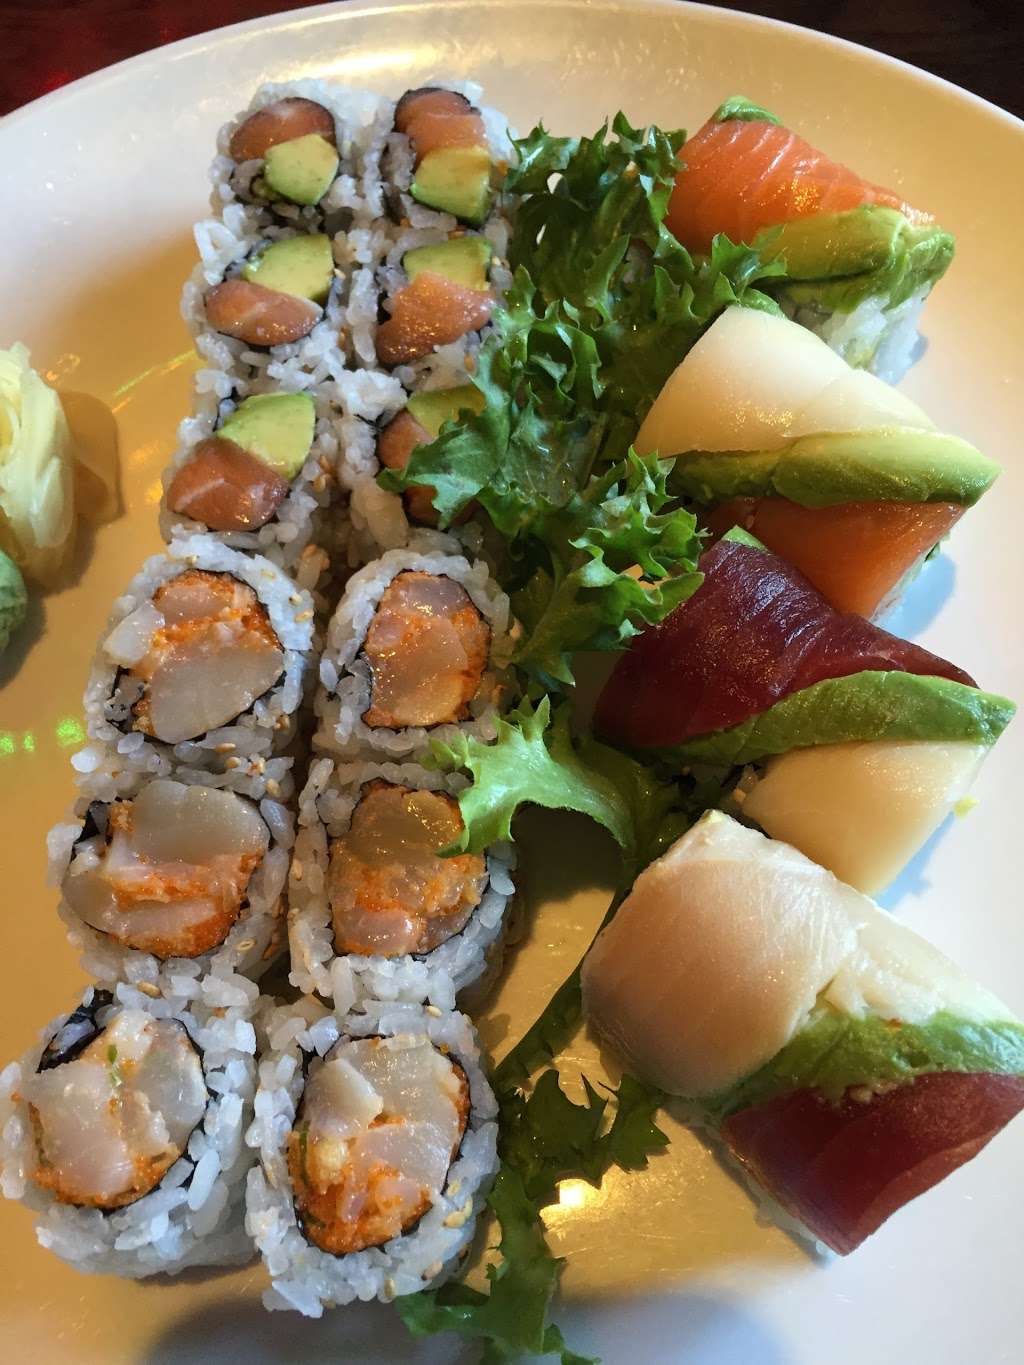 Yum Asian Fusion Cuisine and Sushi | 18220 E 104th Ave, Commerce City, CO 80022 | Phone: (303) 853-0680